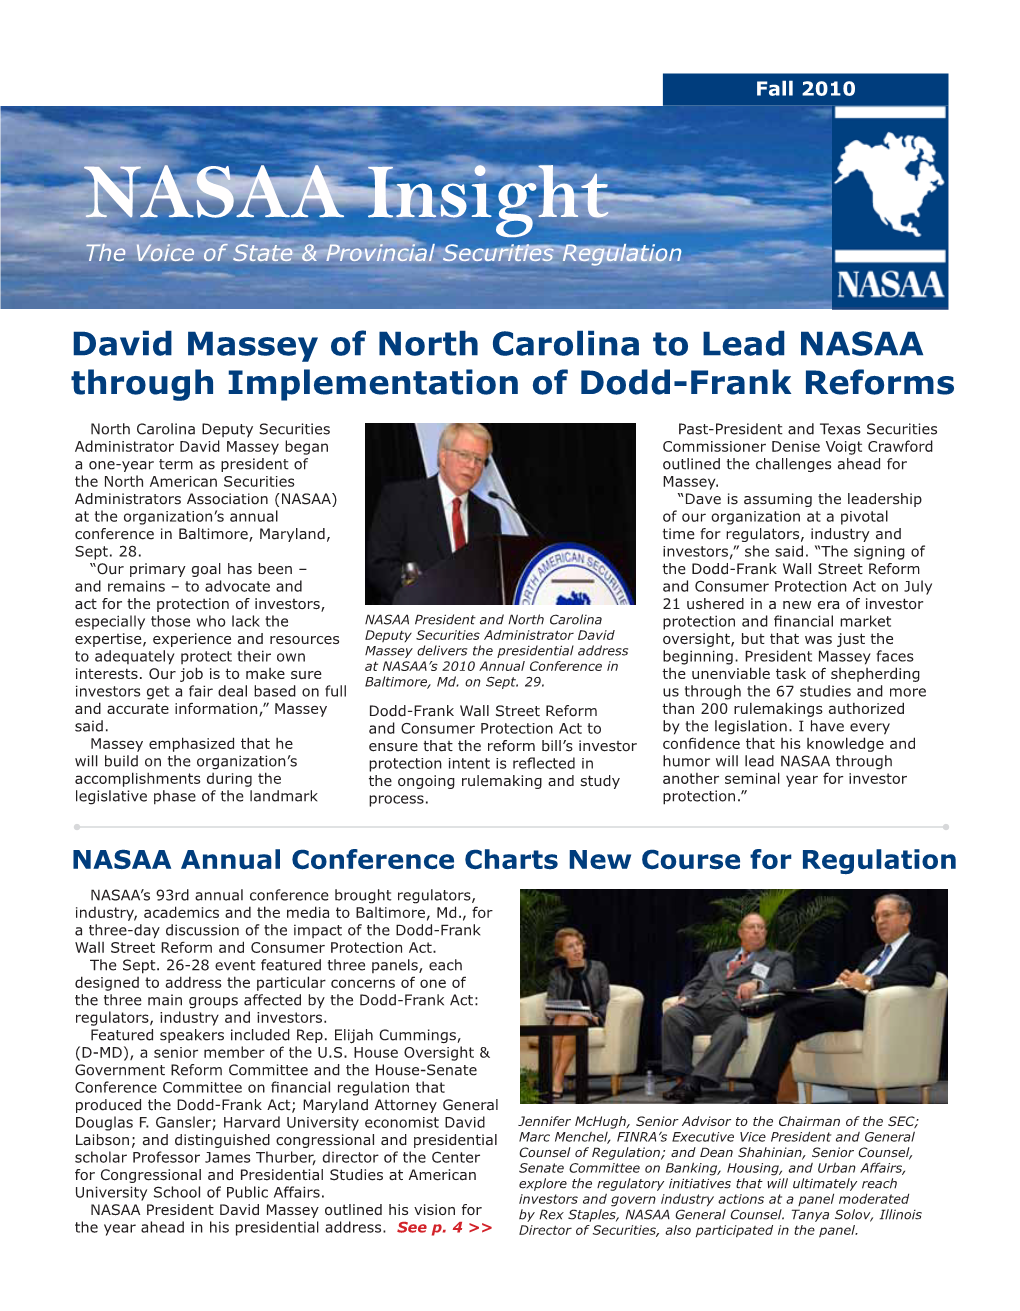 NASAA Insight the Voice of State & Provincial Securities Regulation